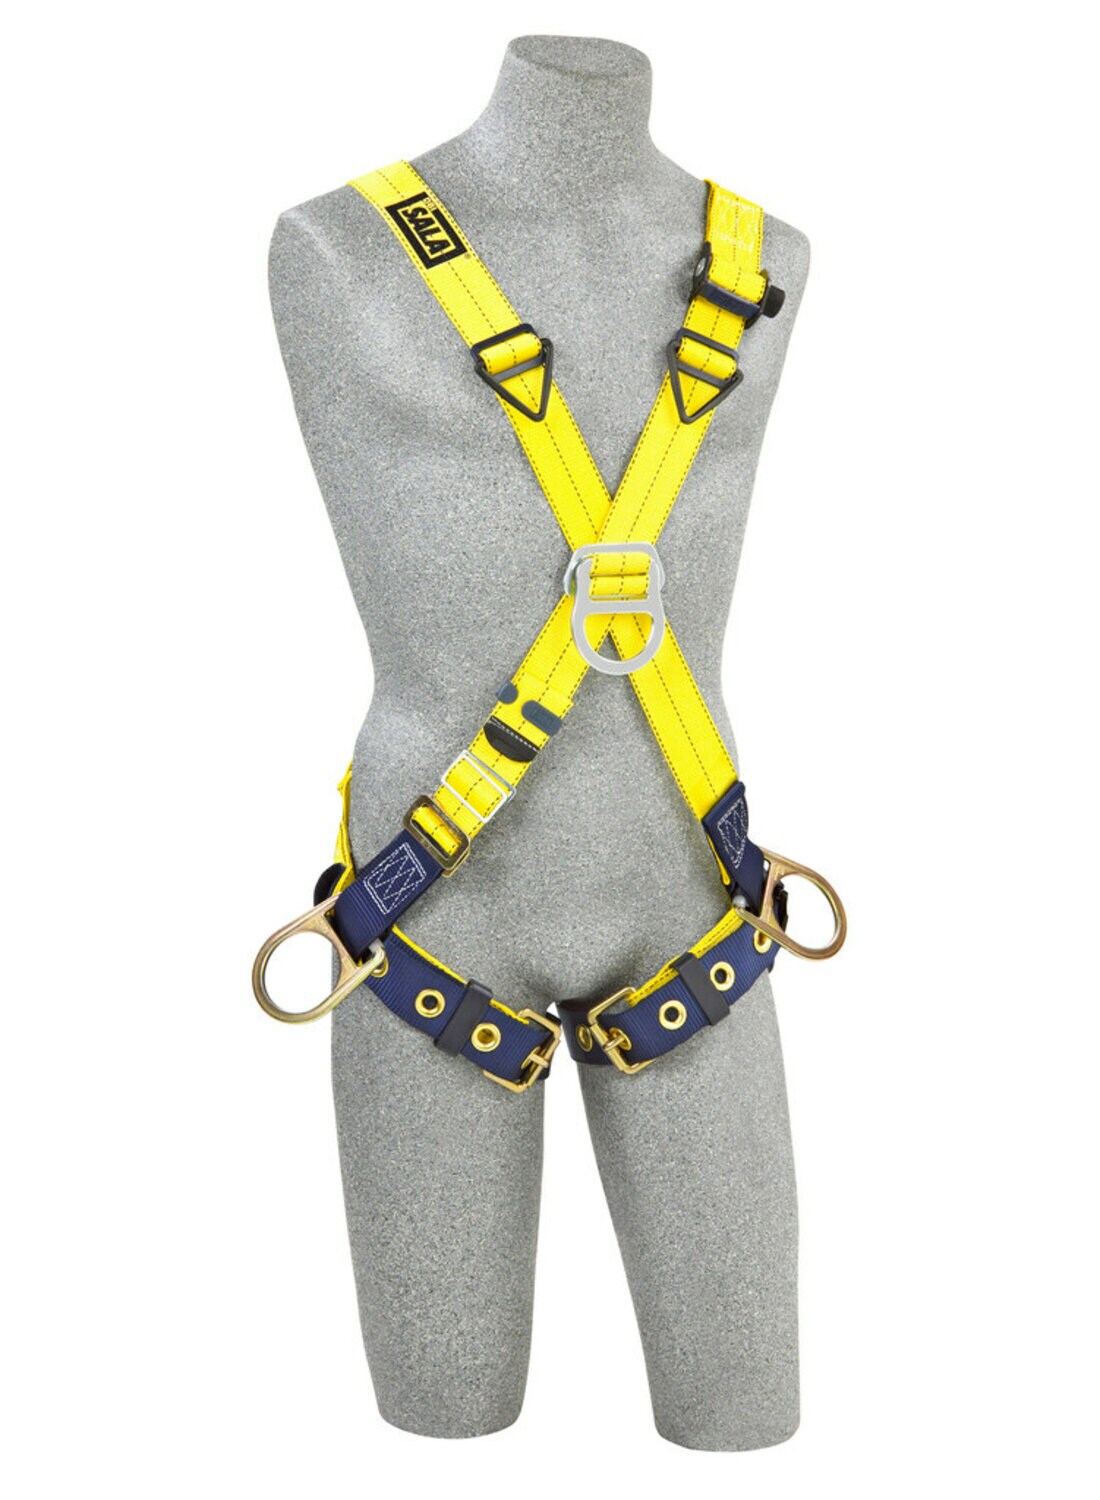 7012815460 - 3M DBI-SALA Delta Cross-Over Climbing/Positioning Safety Harness 1103384, 2X